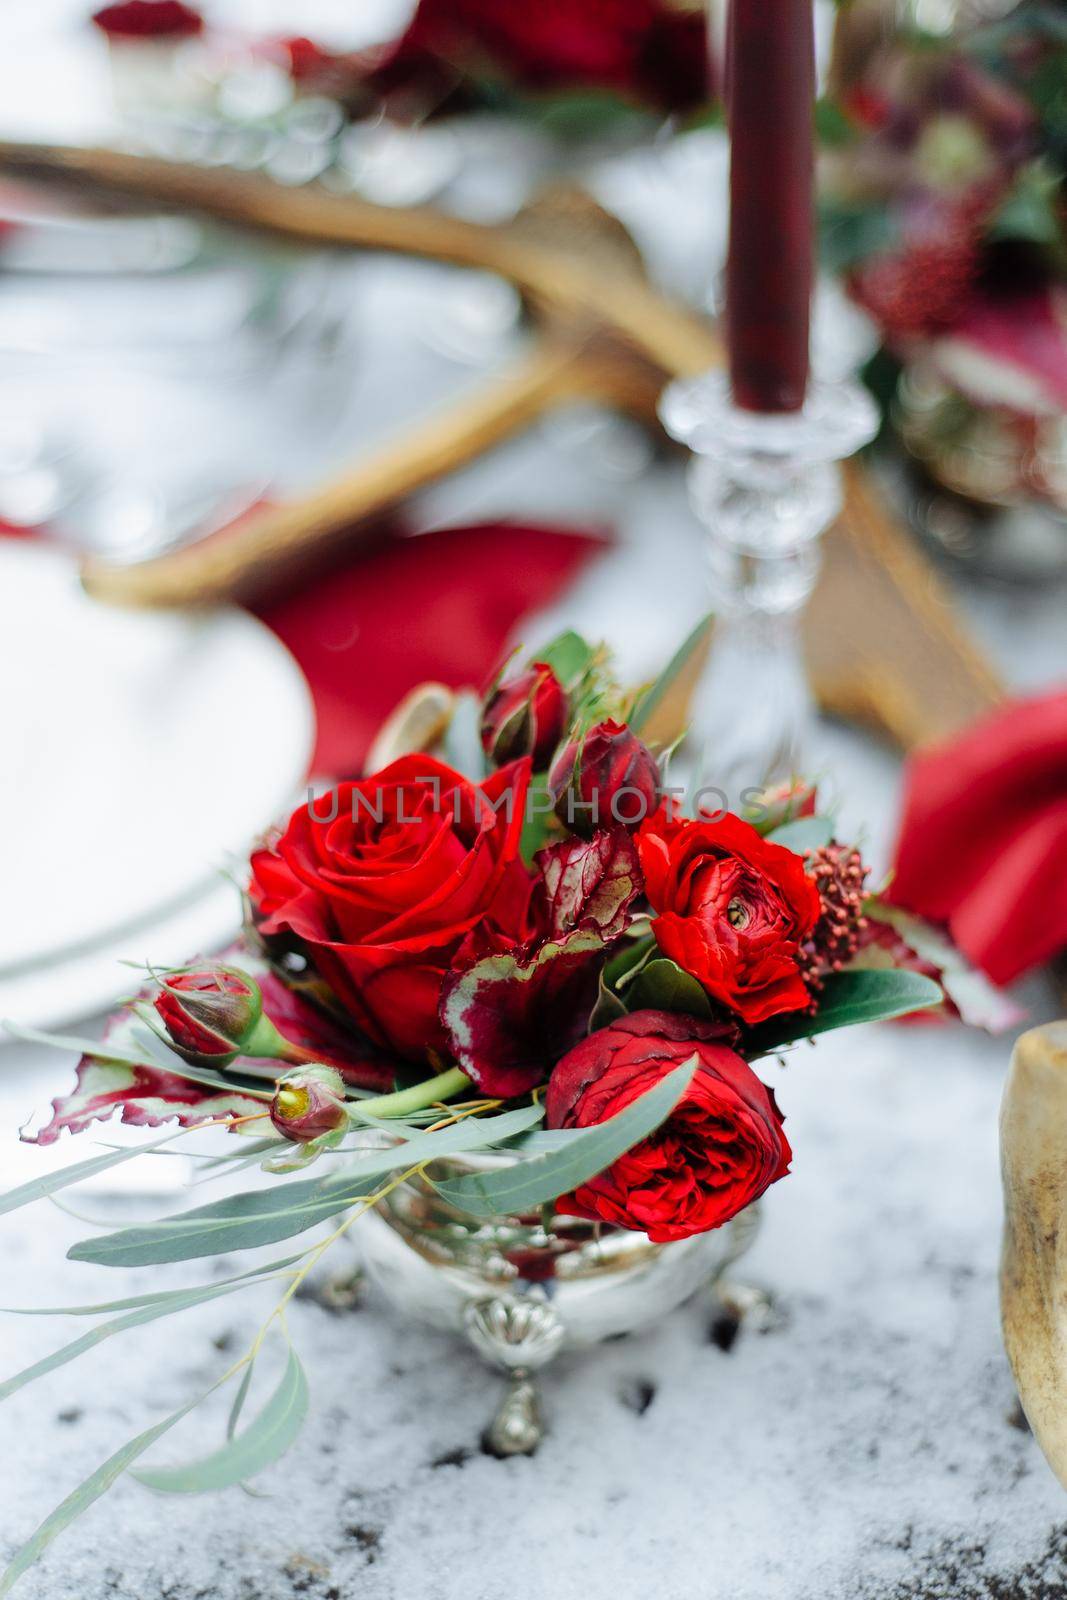 Winter Wedding decor with red roses